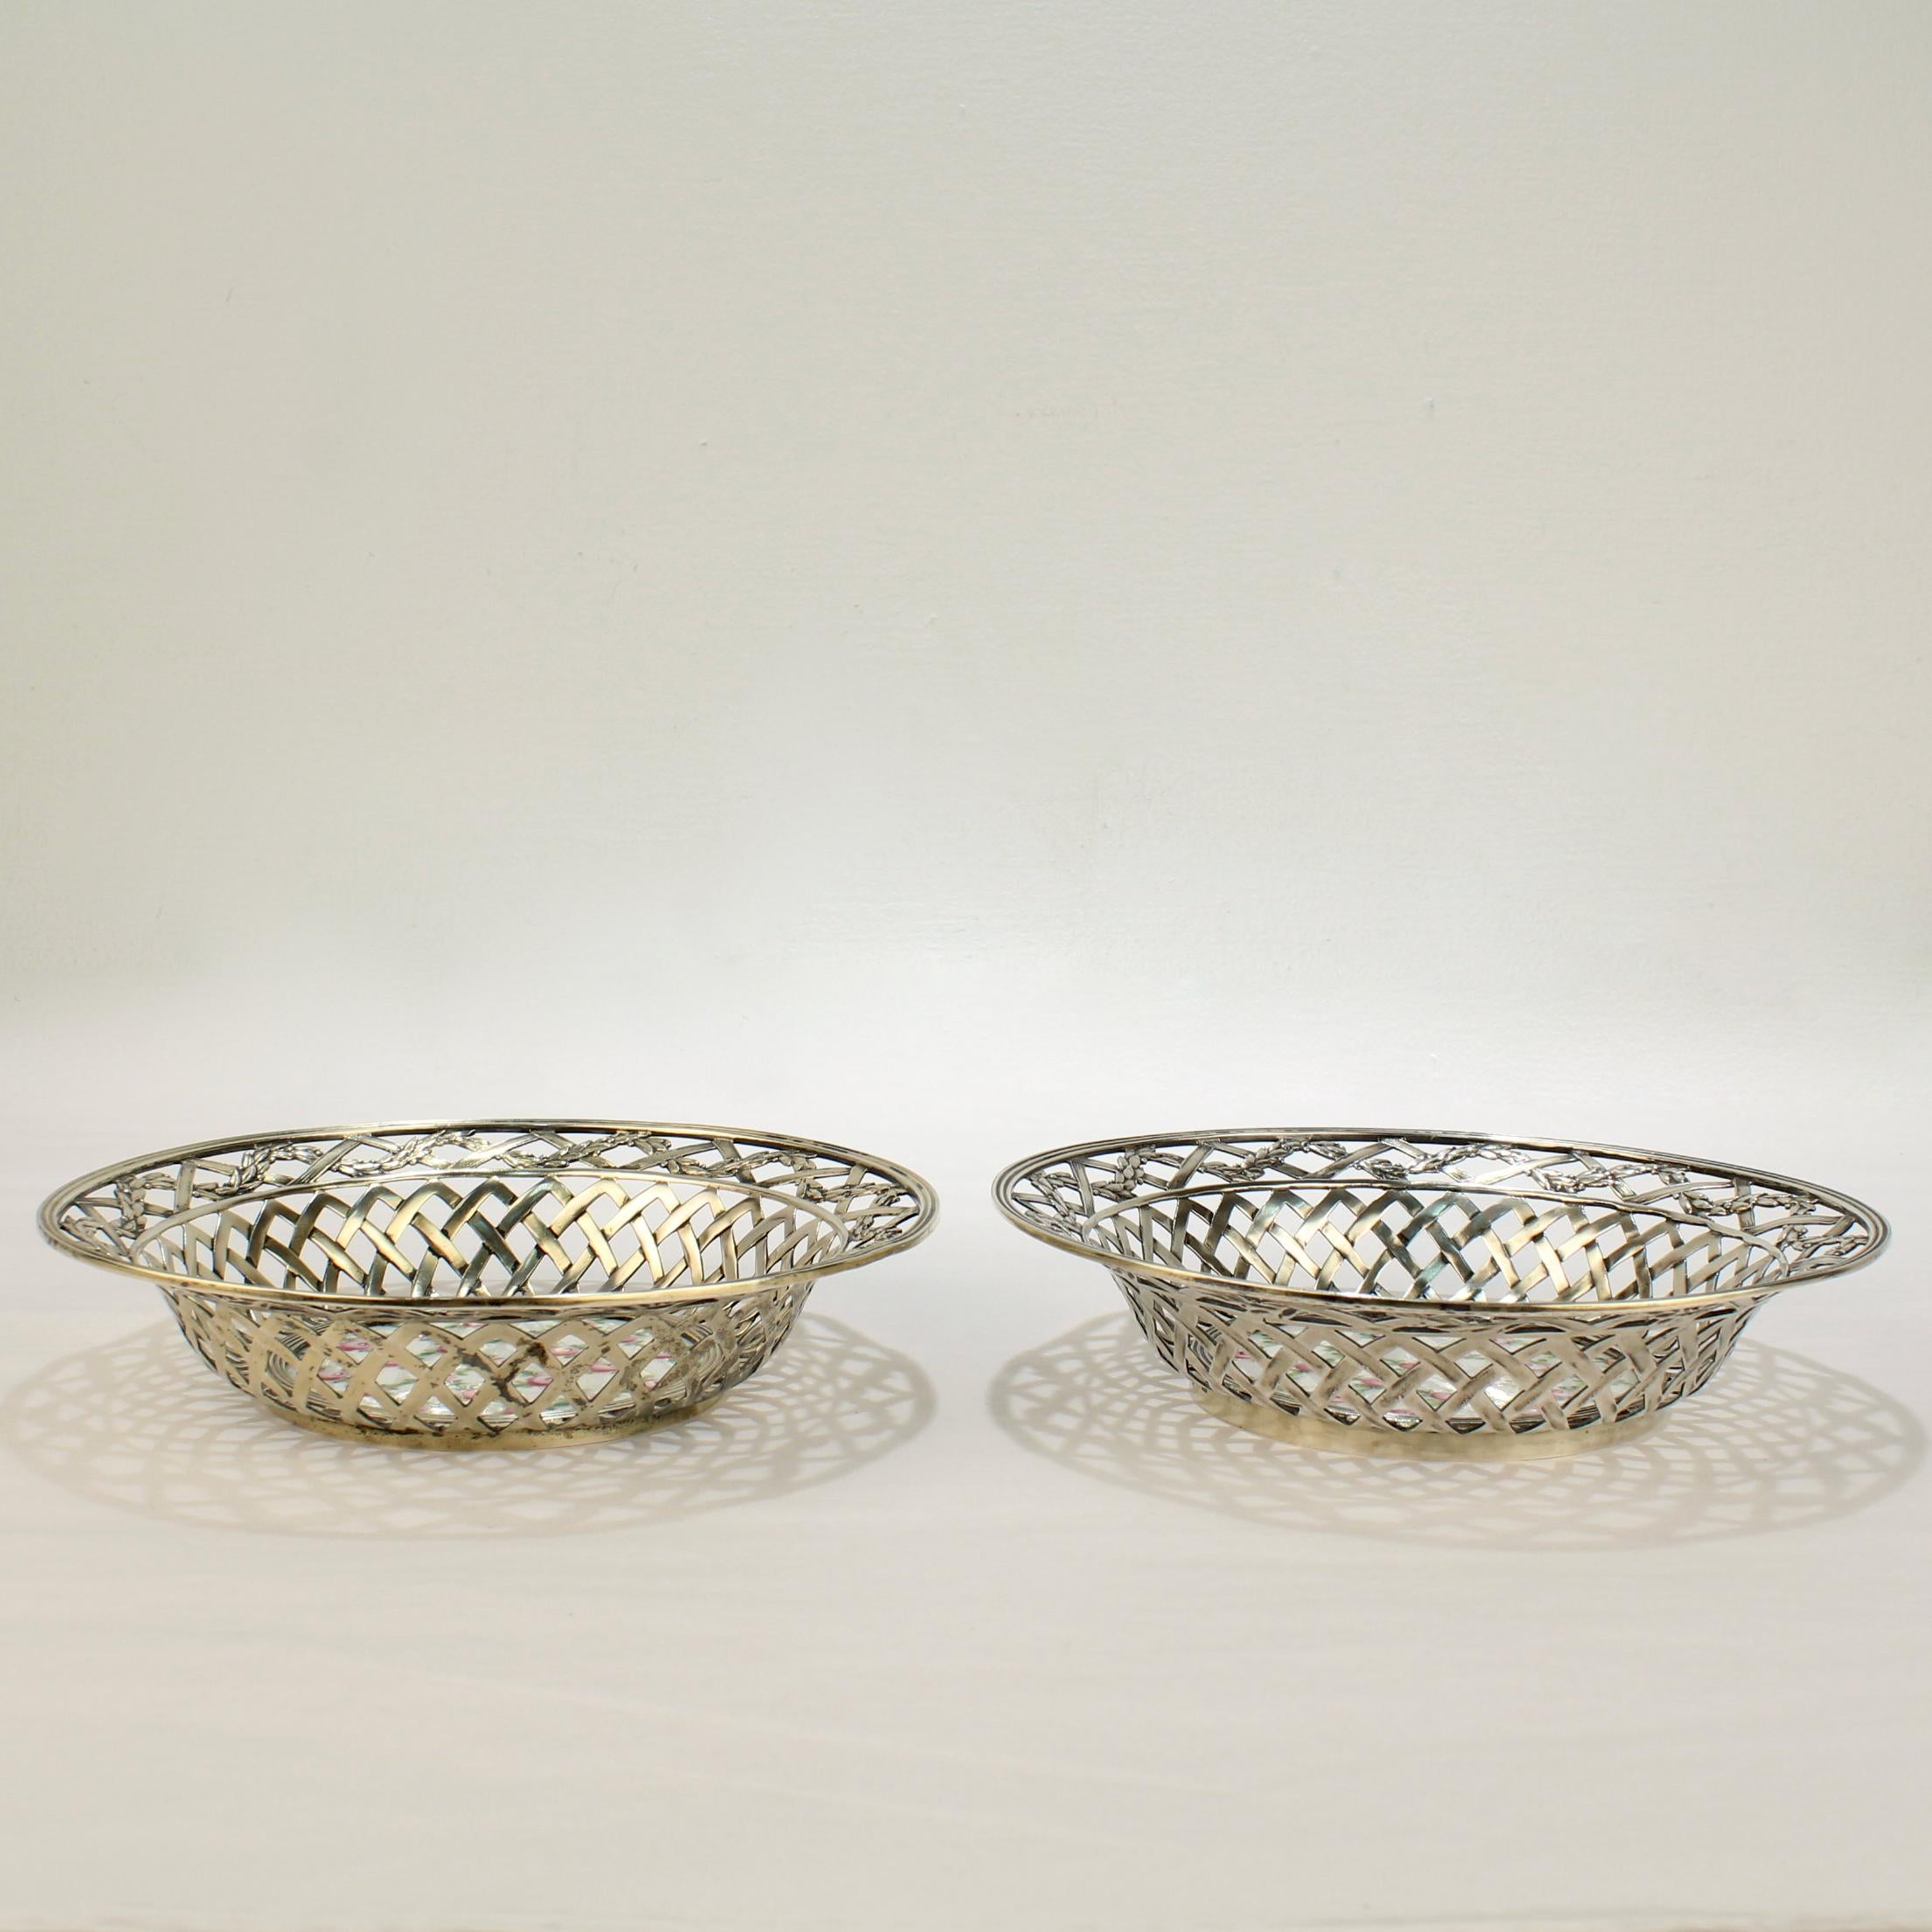 Pair of Antique Reticulated Sterling Silver Bowls with Sevres Porcelain Plaques For Sale 2